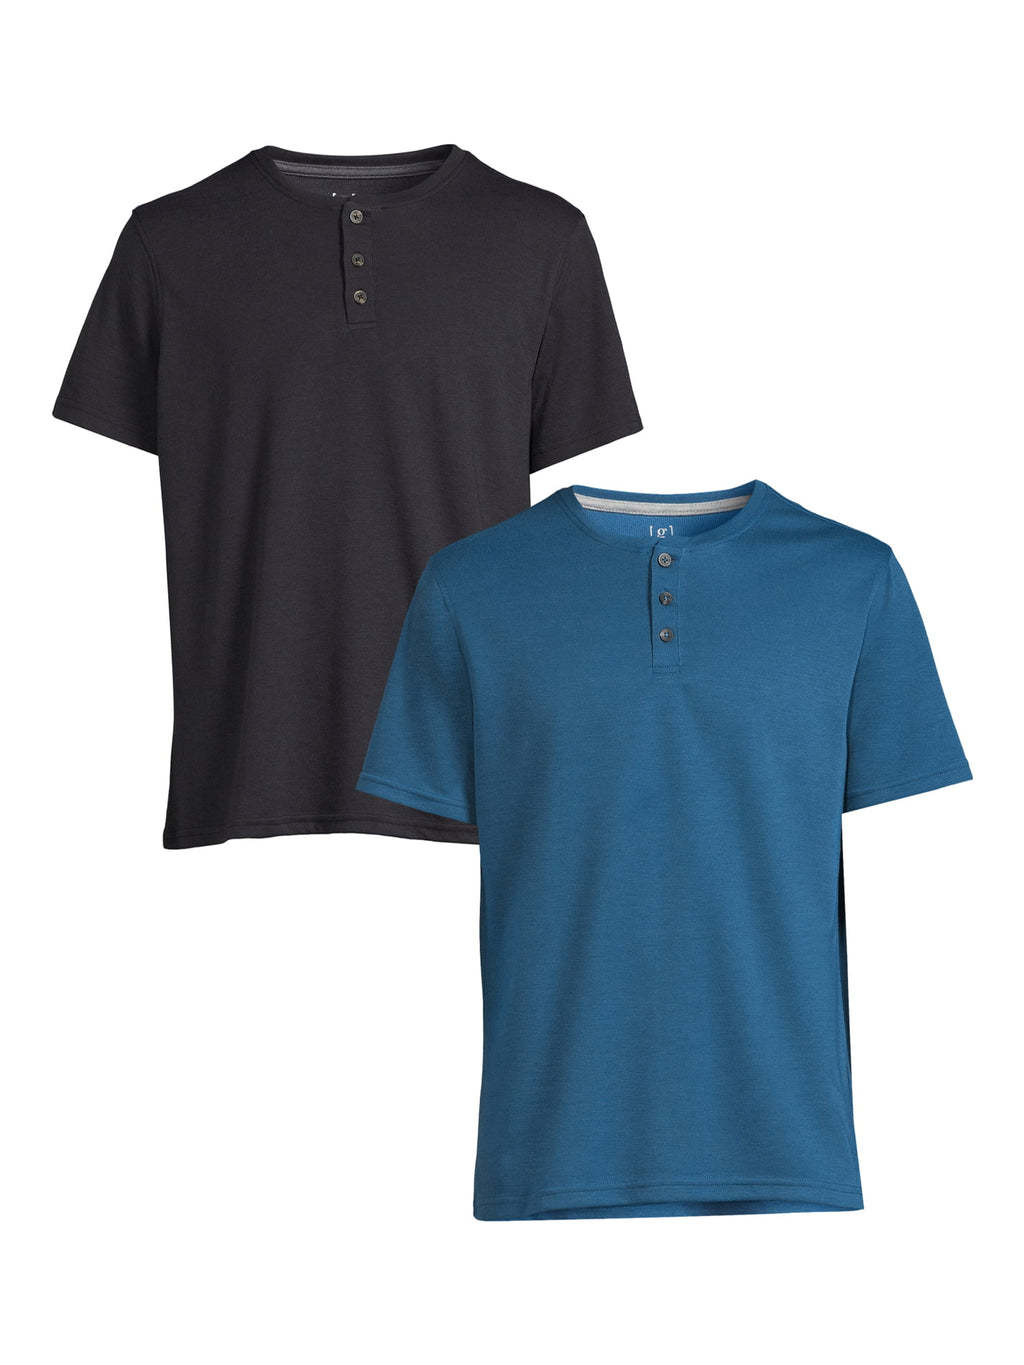 George Men's Henley Tee with Short Sleeves, 2-Pack - image 1 of 5